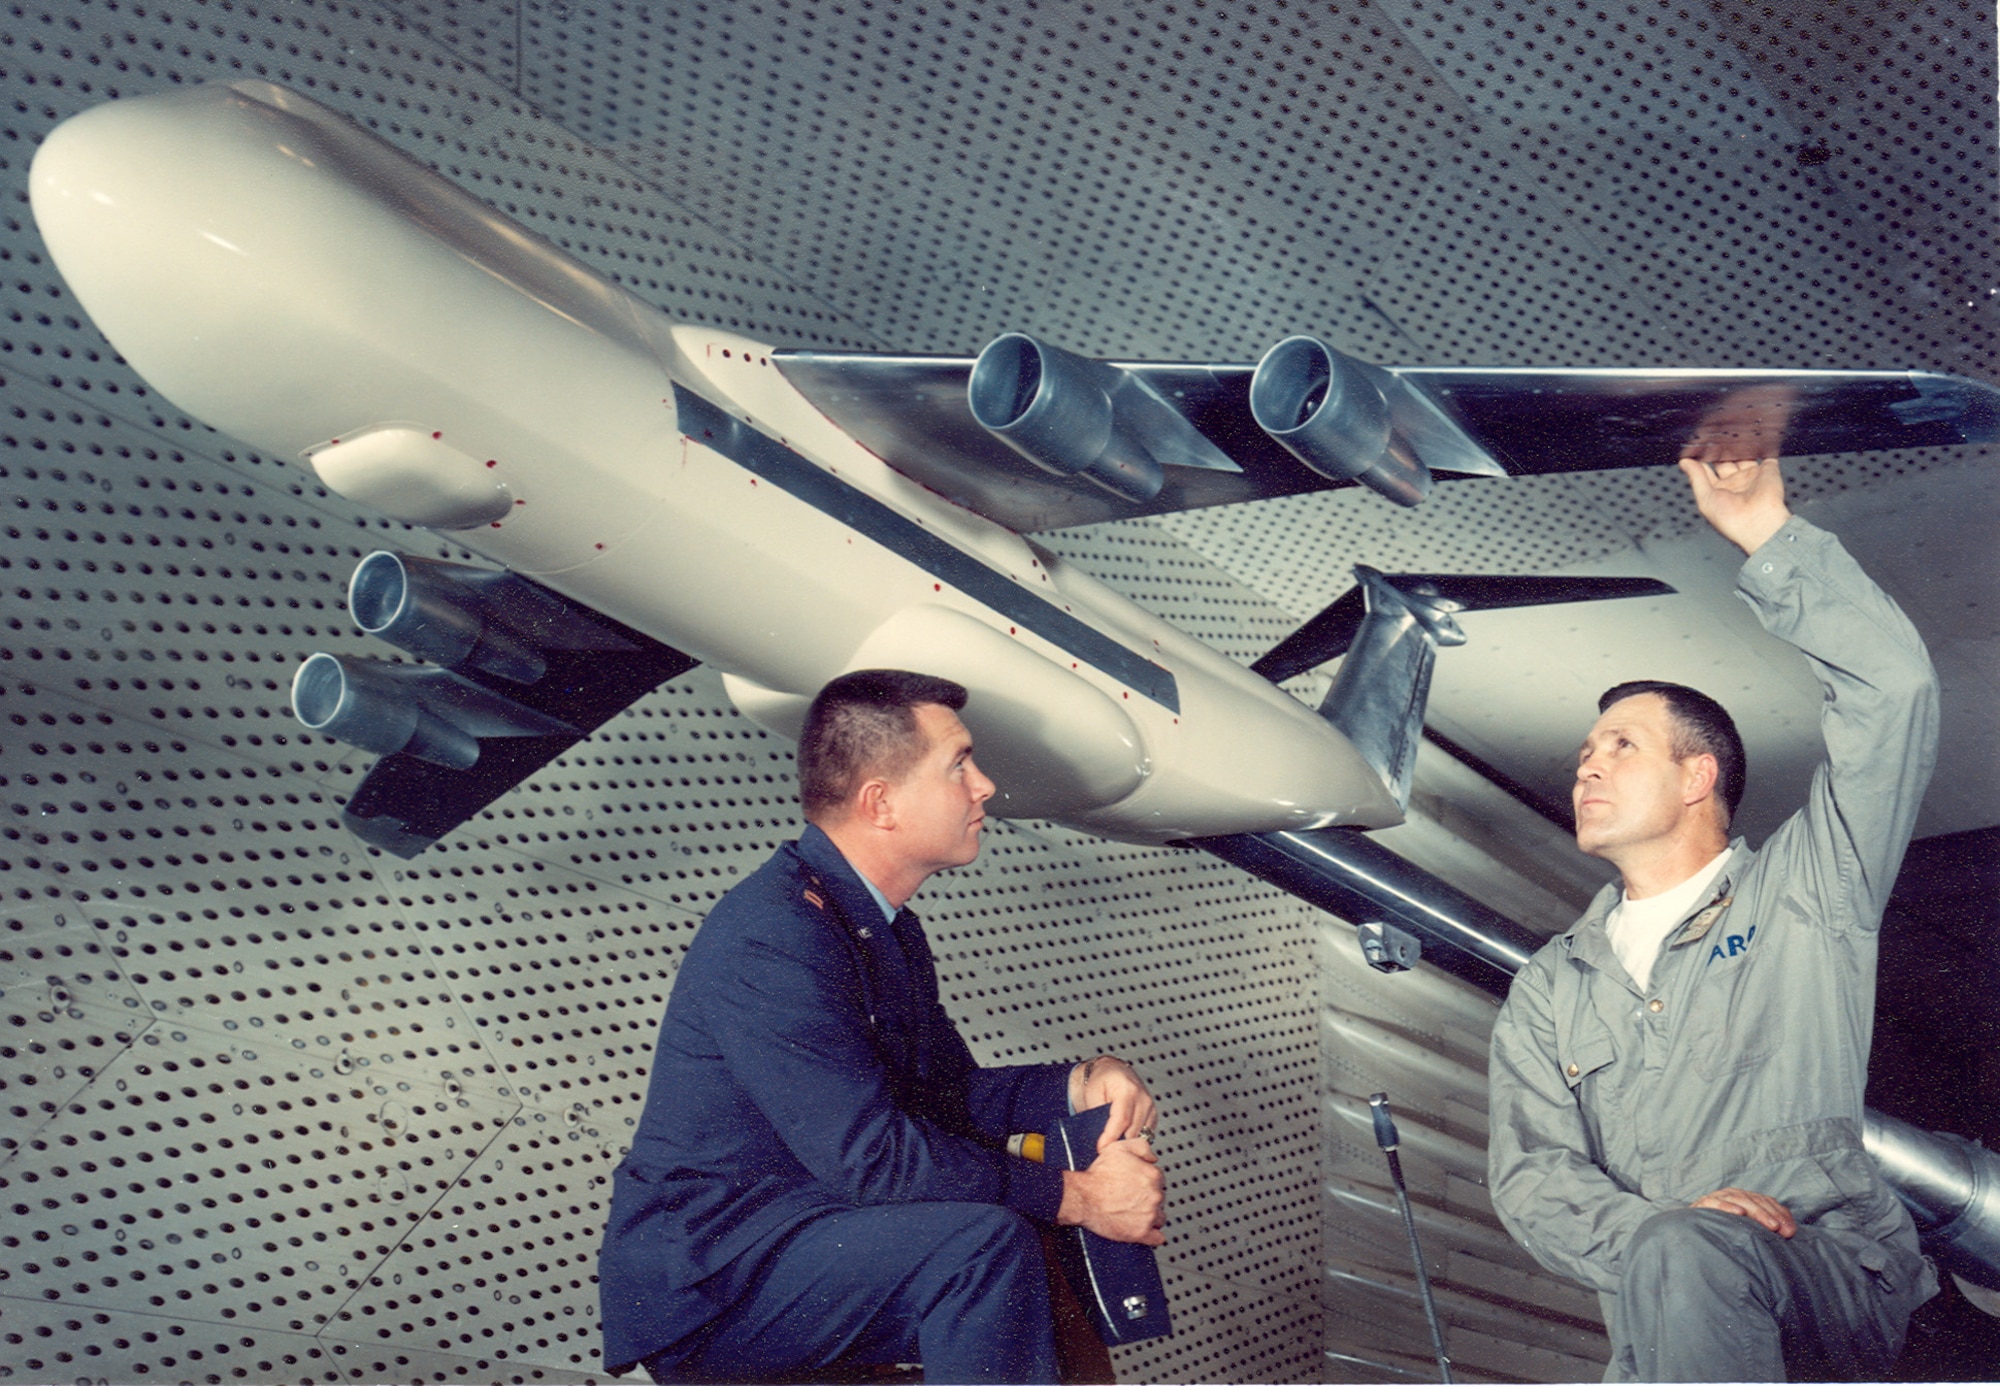 One of the first C-5A models is given a final inspection before testing in the Arnold Engineering Development Complex 16-foot transonic wind tunnel at Arnold Air Force Base in the mid-1960s. The wind tunnel, also known as 16T, is part of the AEDC Propulsion Wind Tunnel facility. PWT was designated as an International Historic Mechanical Engineering Landmark in 1989. (U.S. Air Force photo)